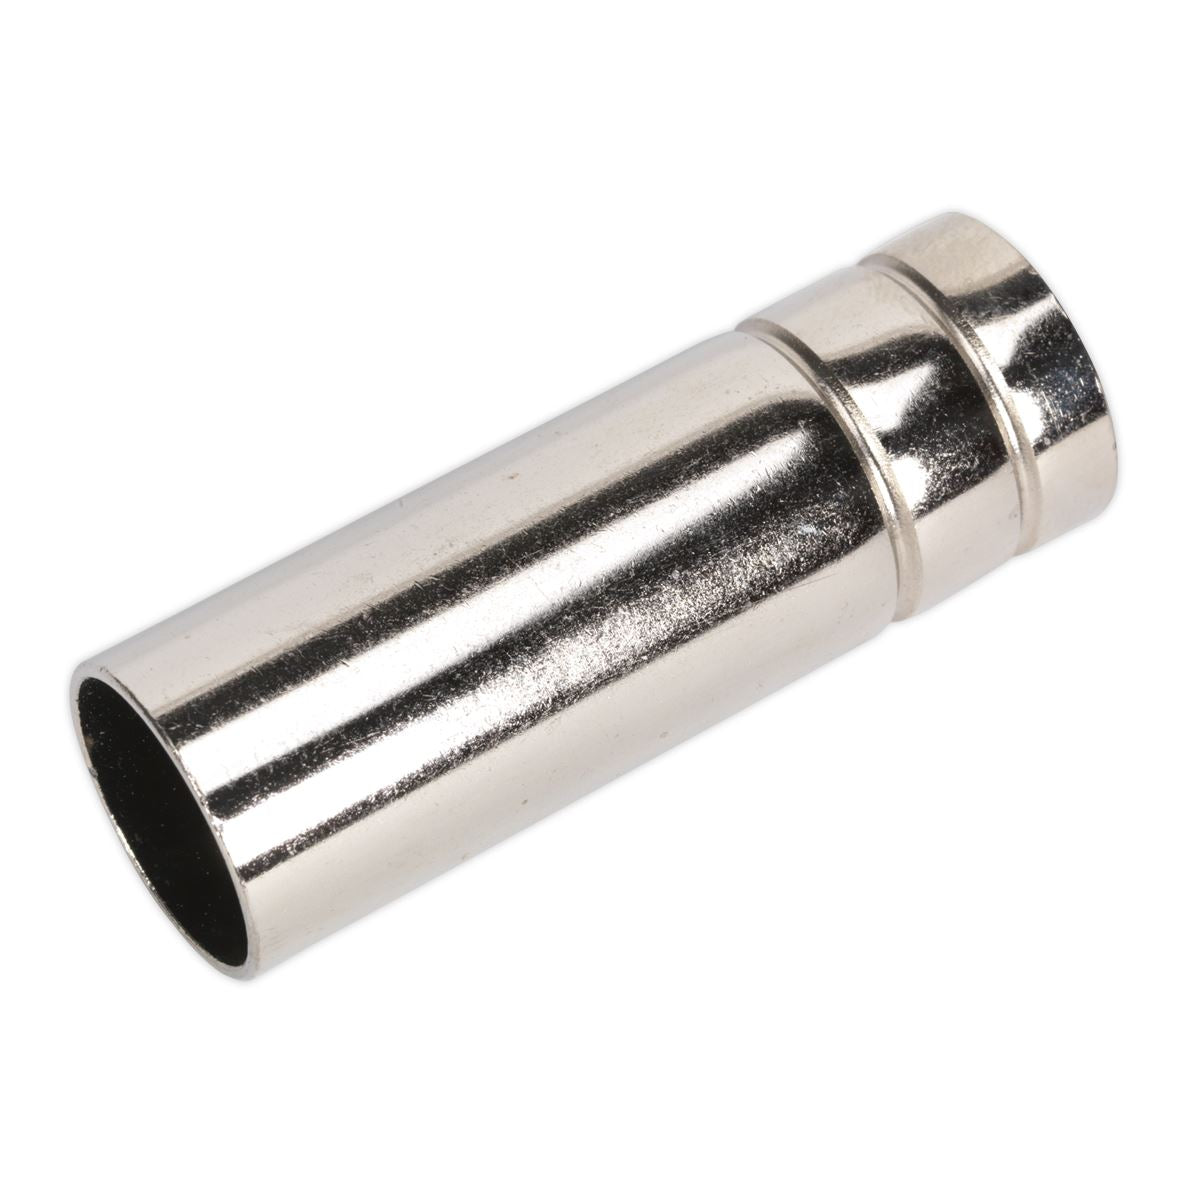 Sealey Cylindrical Nozzle MB15 Single (formerly 120/722149)